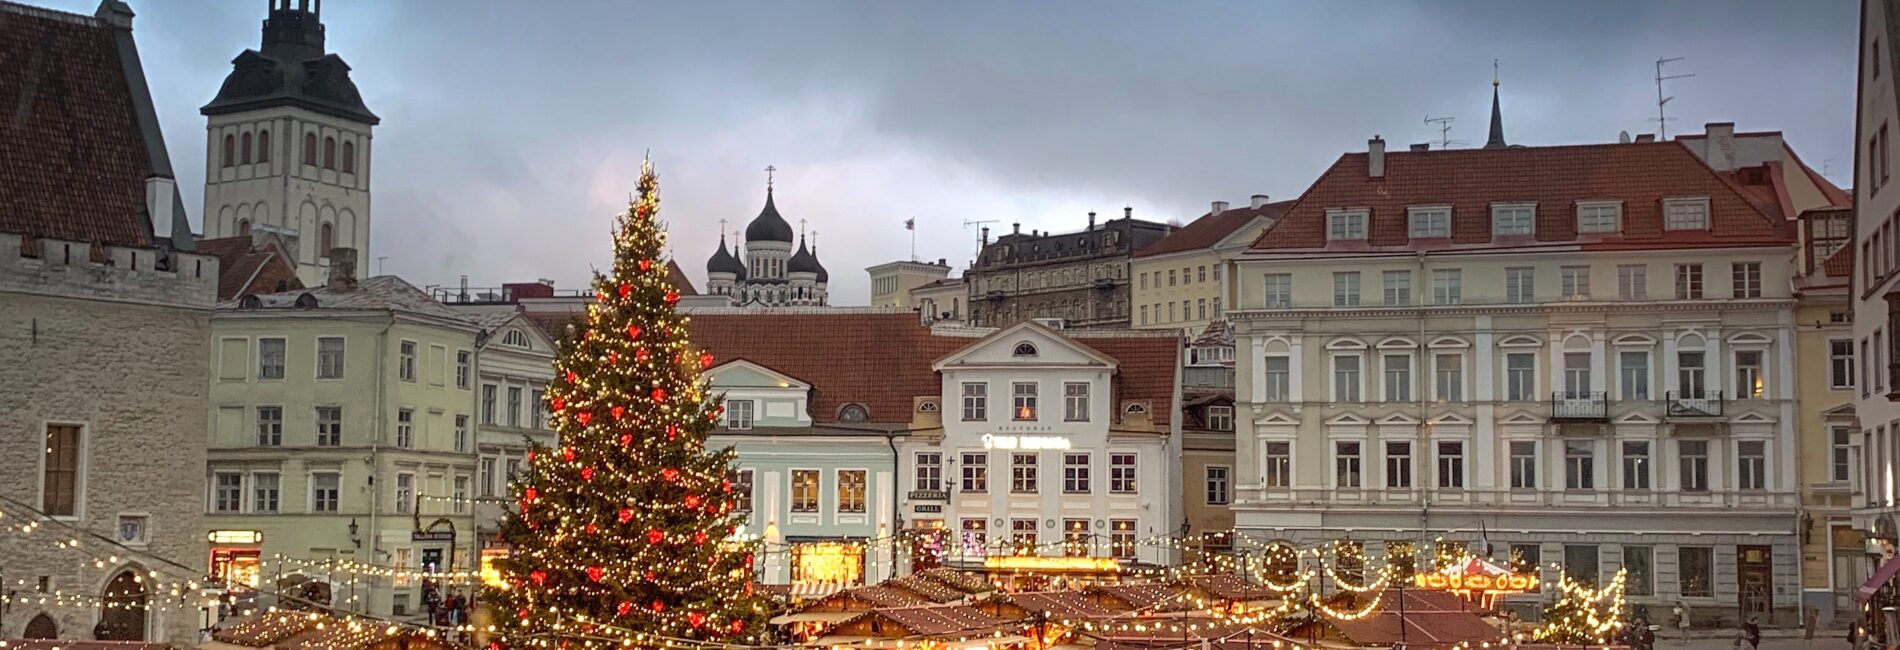 Contemporary Christmas: 5 cities to pair Christmas markets and contemporary art